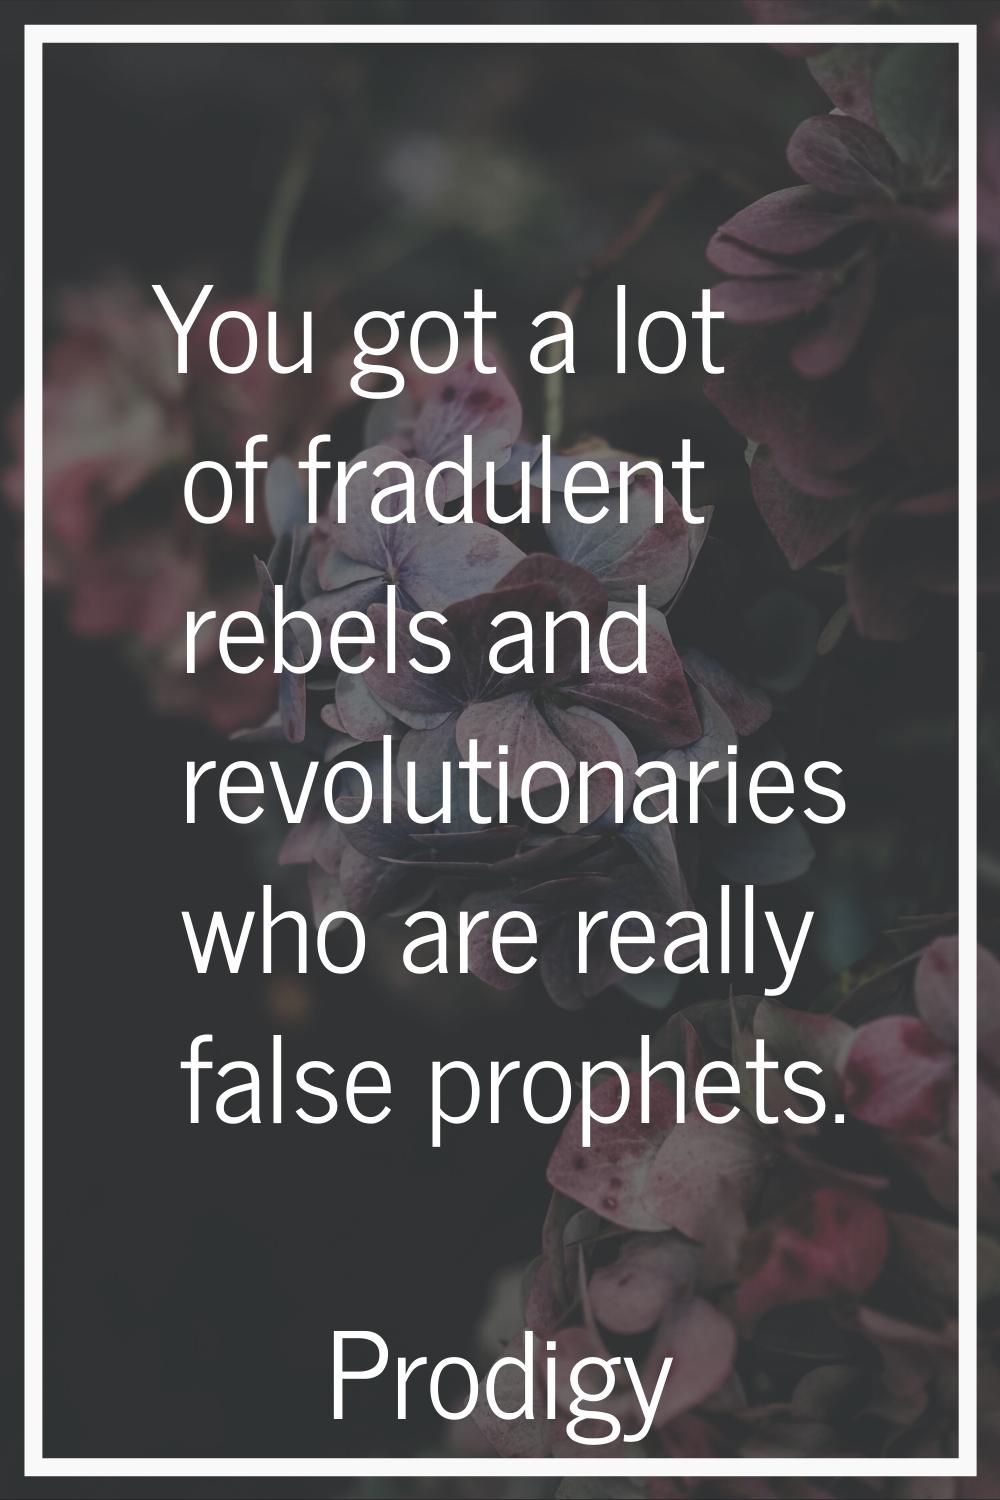 You got a lot of fradulent rebels and revolutionaries who are really false prophets.